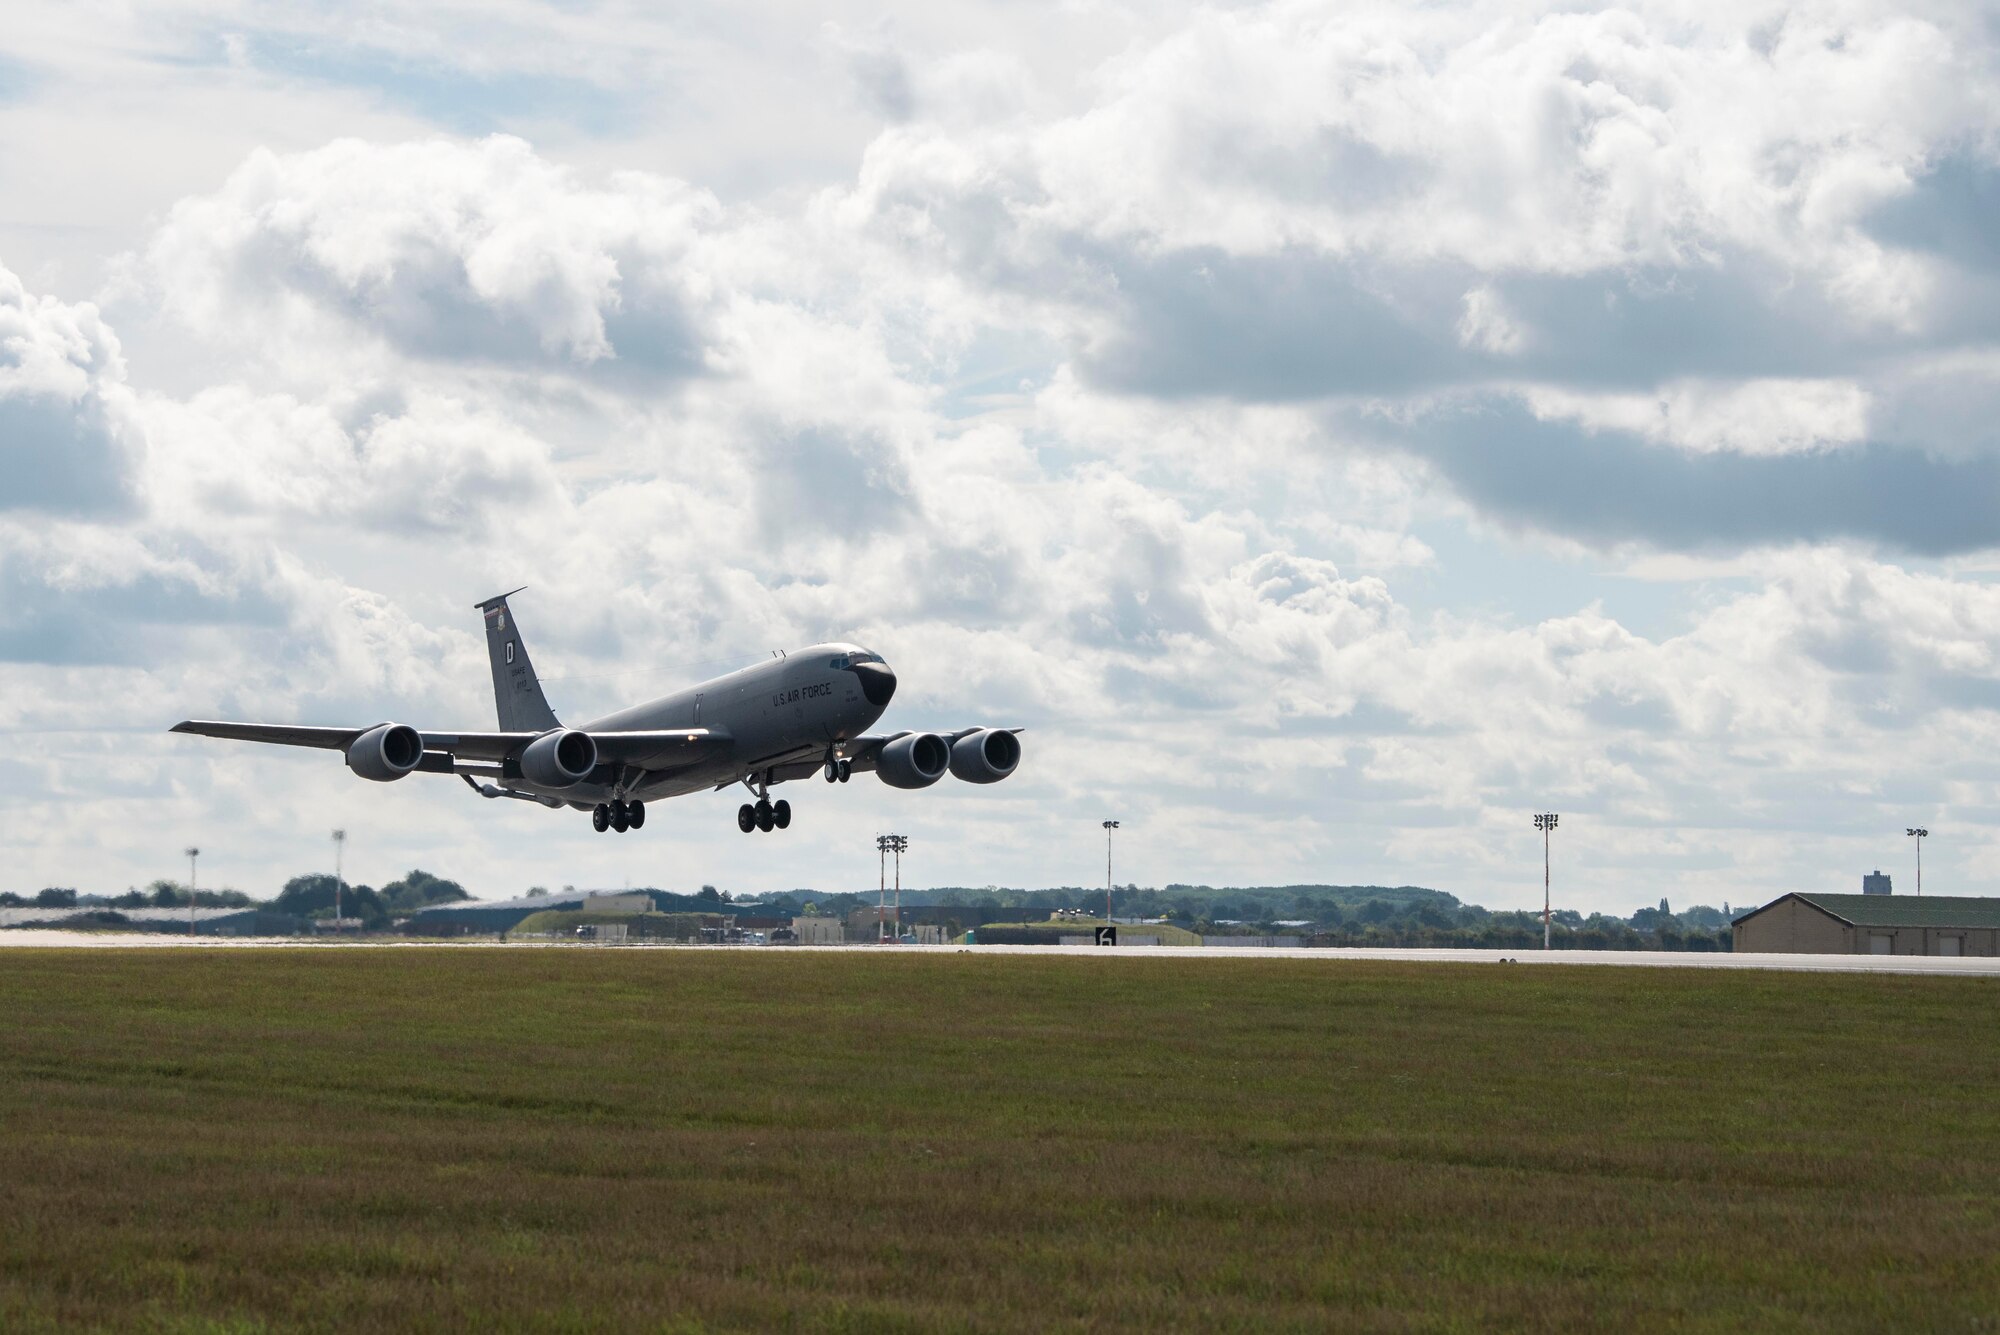 A 100th Air Refueling Wing KC-135 Stratotanker aircraft takes off from Royal Air Force Mildenhall, England, Aug. 18, 2020. The KC-135 provides global, rapid aerial refueling capability for Europe and Africa as the only permanent air refueling wing. (U.S. Air Force photo by Airman 1st Class Joseph Barron)